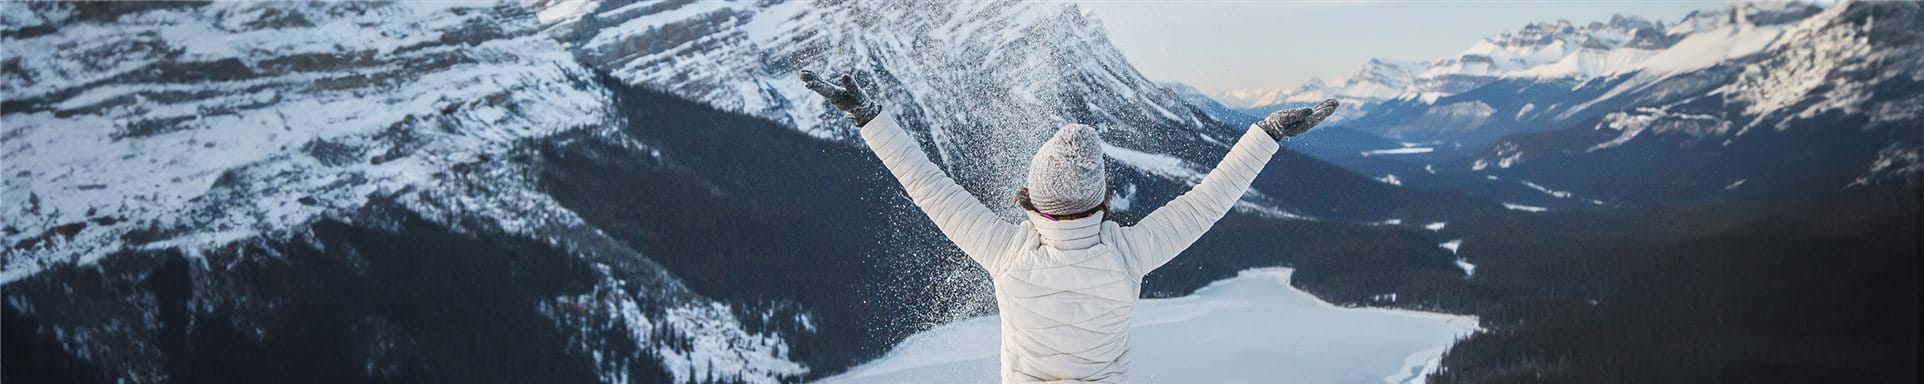 Woman standing on mountain in snow